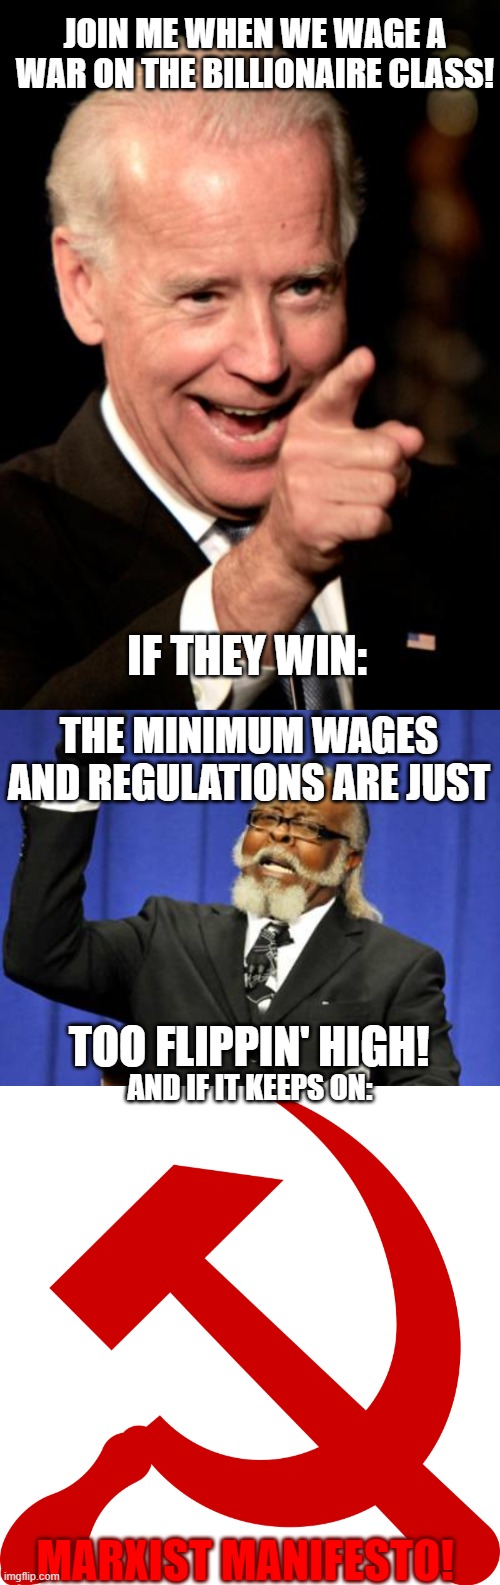 Don't let them win. Marxism is the step after the B-H ticket. | JOIN ME WHEN WE WAGE A WAR ON THE BILLIONAIRE CLASS! IF THEY WIN:; THE MINIMUM WAGES AND REGULATIONS ARE JUST; TOO FLIPPIN' HIGH! AND IF IT KEEPS ON:; MARXIST MANIFESTO! | image tagged in memes,too damn high,smilin biden,communism,marxism,leftists | made w/ Imgflip meme maker